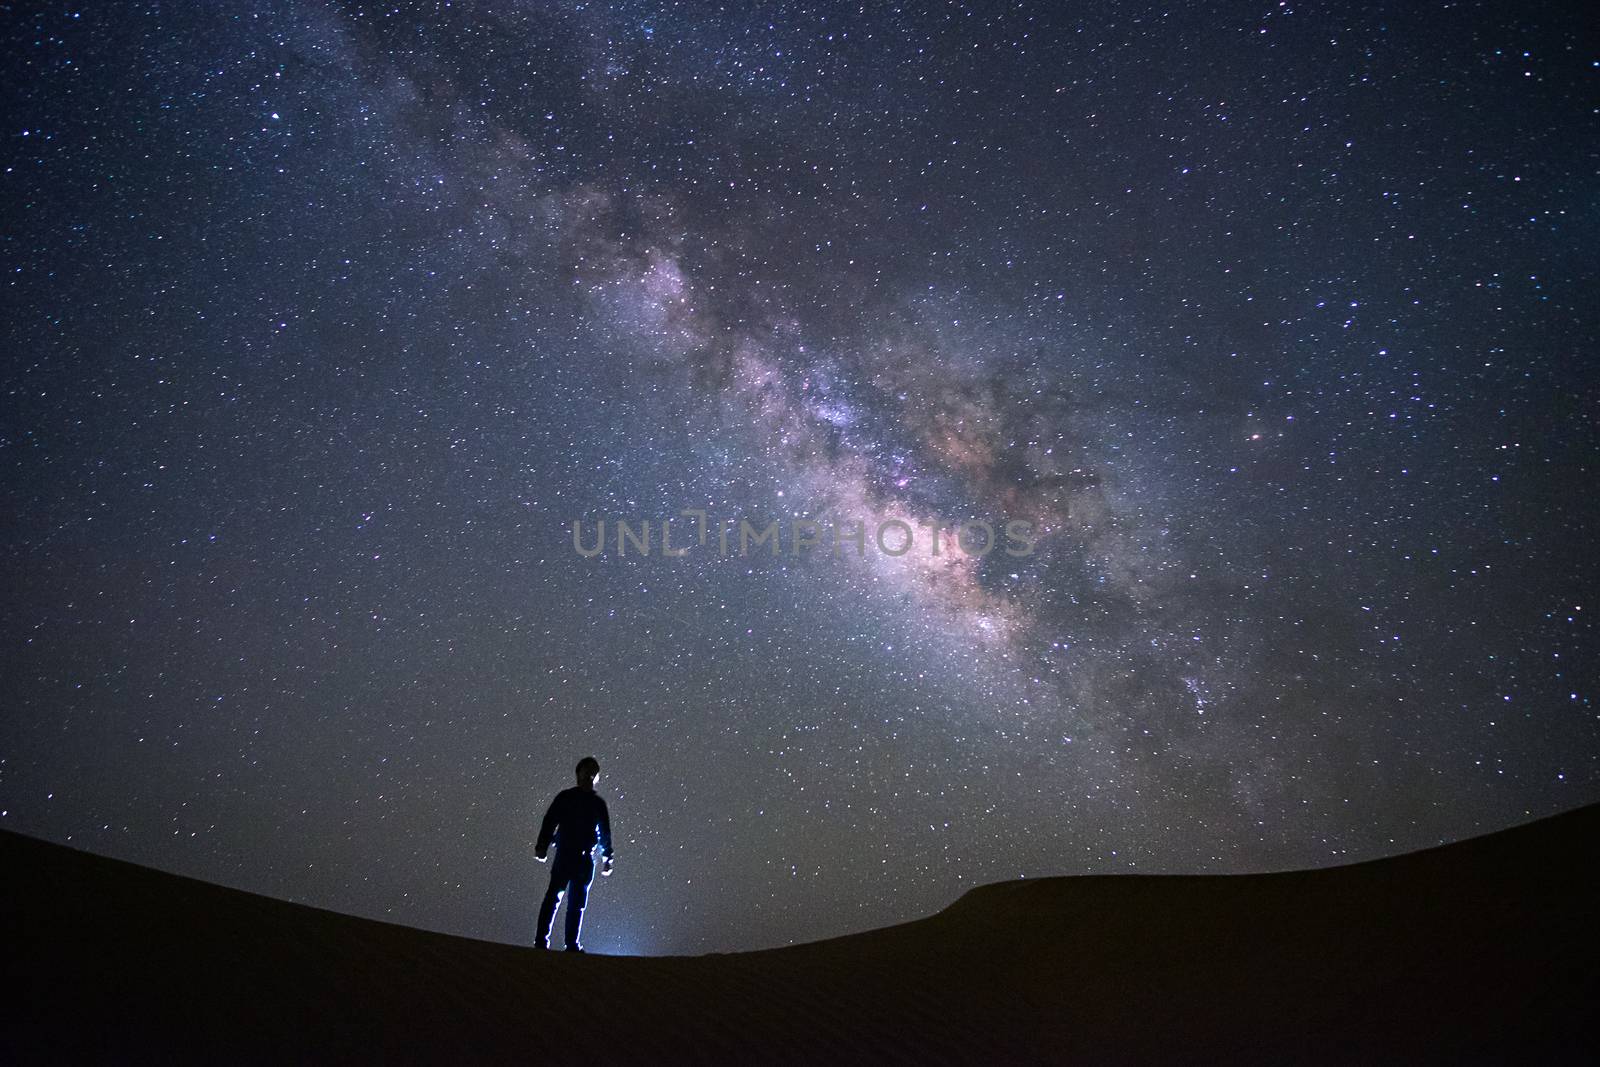 Milky way galaxy with a man standing and watching at Tar desert, Jaisalmer, India. Astro photography.